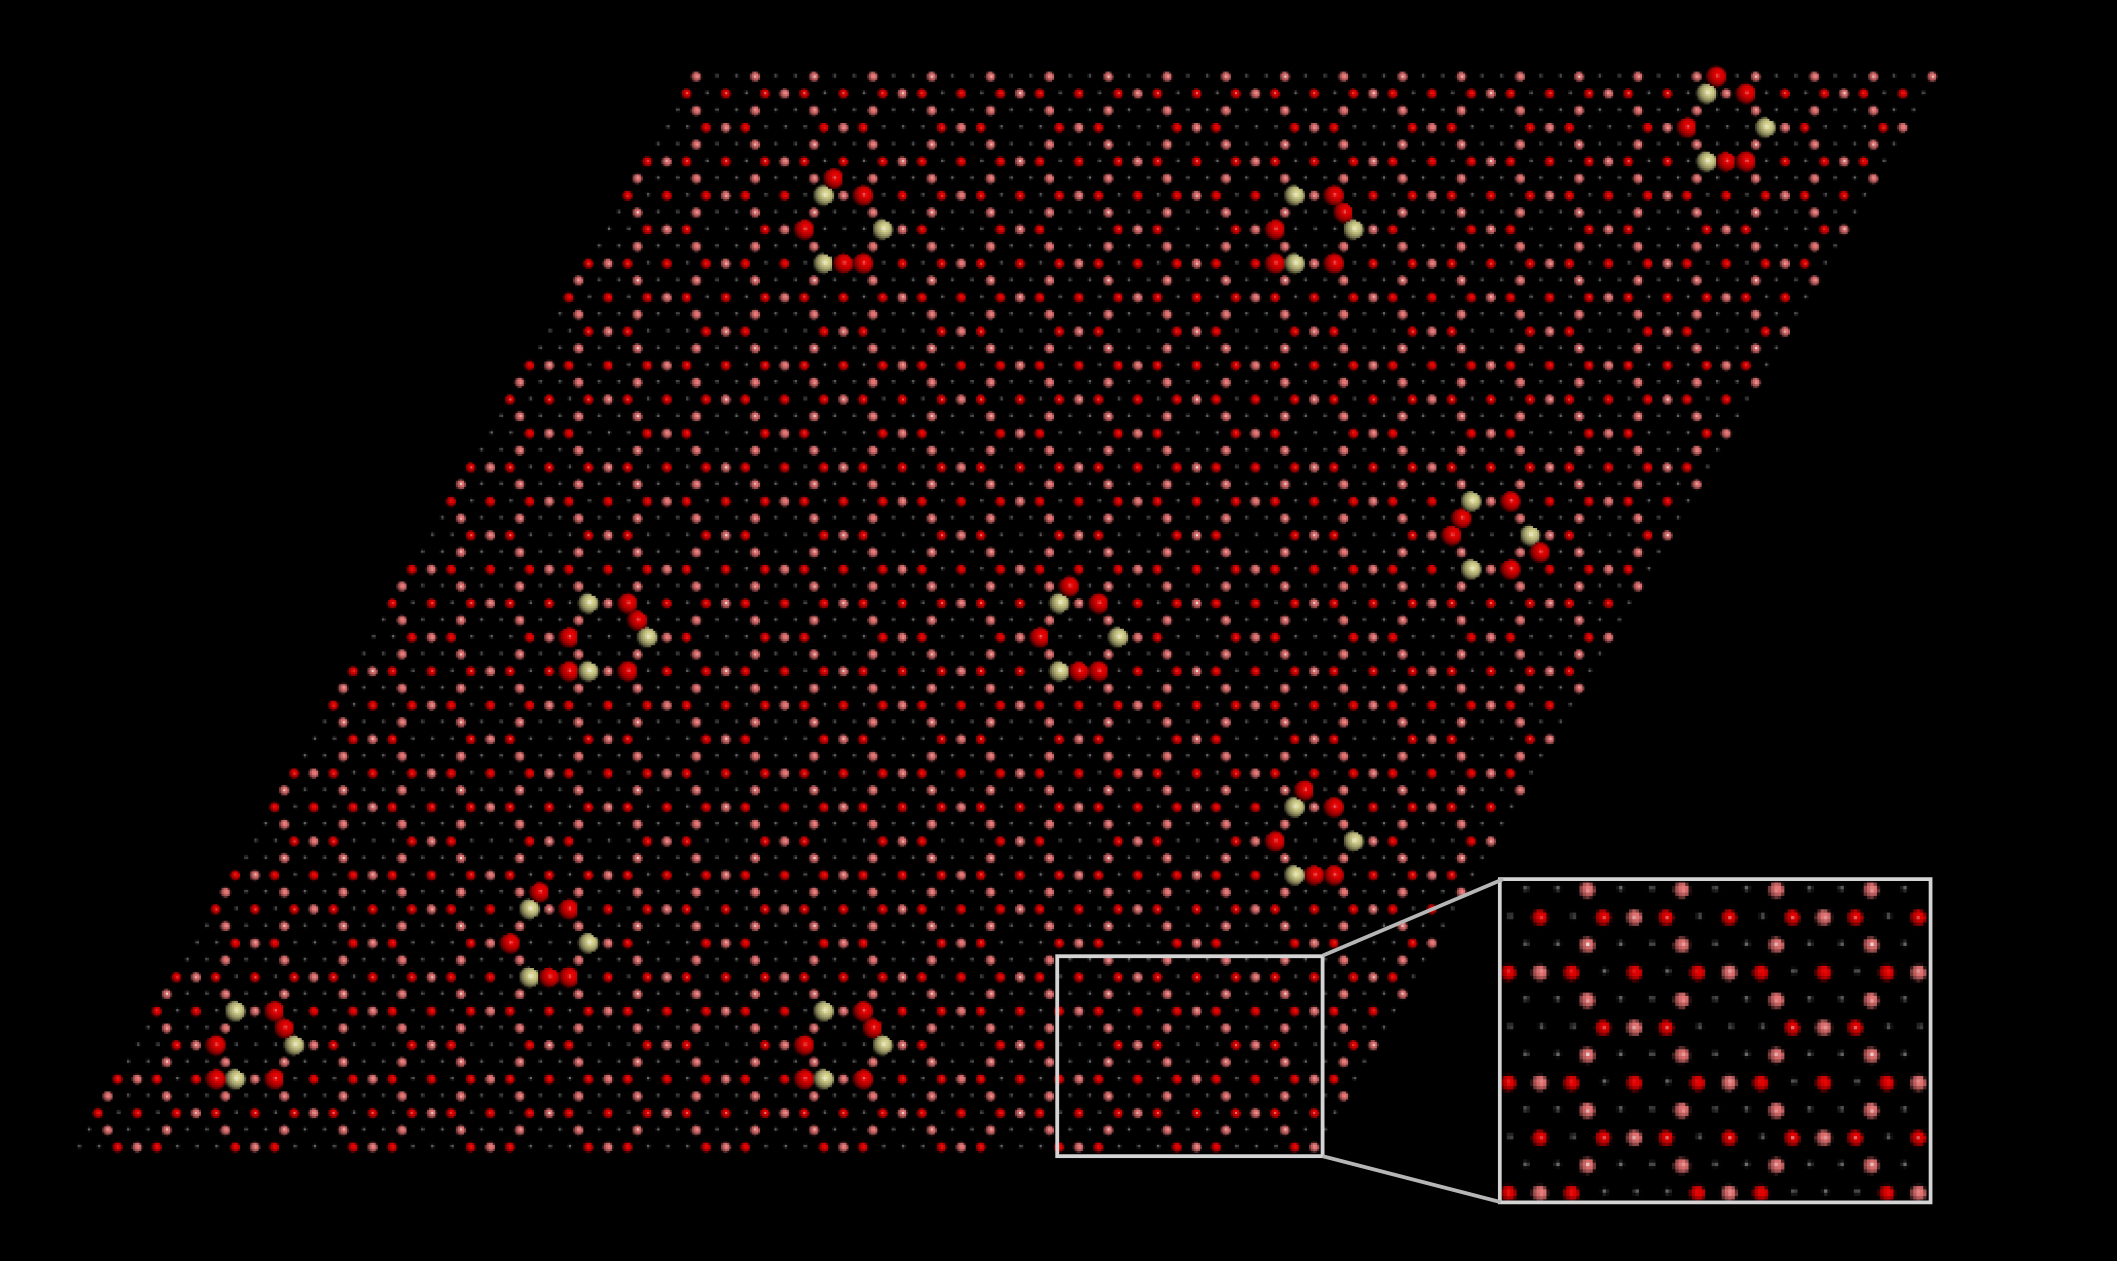 Hexagonally ordered array of colored dots on a black background. Nine hexagons of larger dots are evenly scattered throughout the array. The inset magnifies the smallest dots, evenly distributed inside the hexagons, representing the copper substrate.